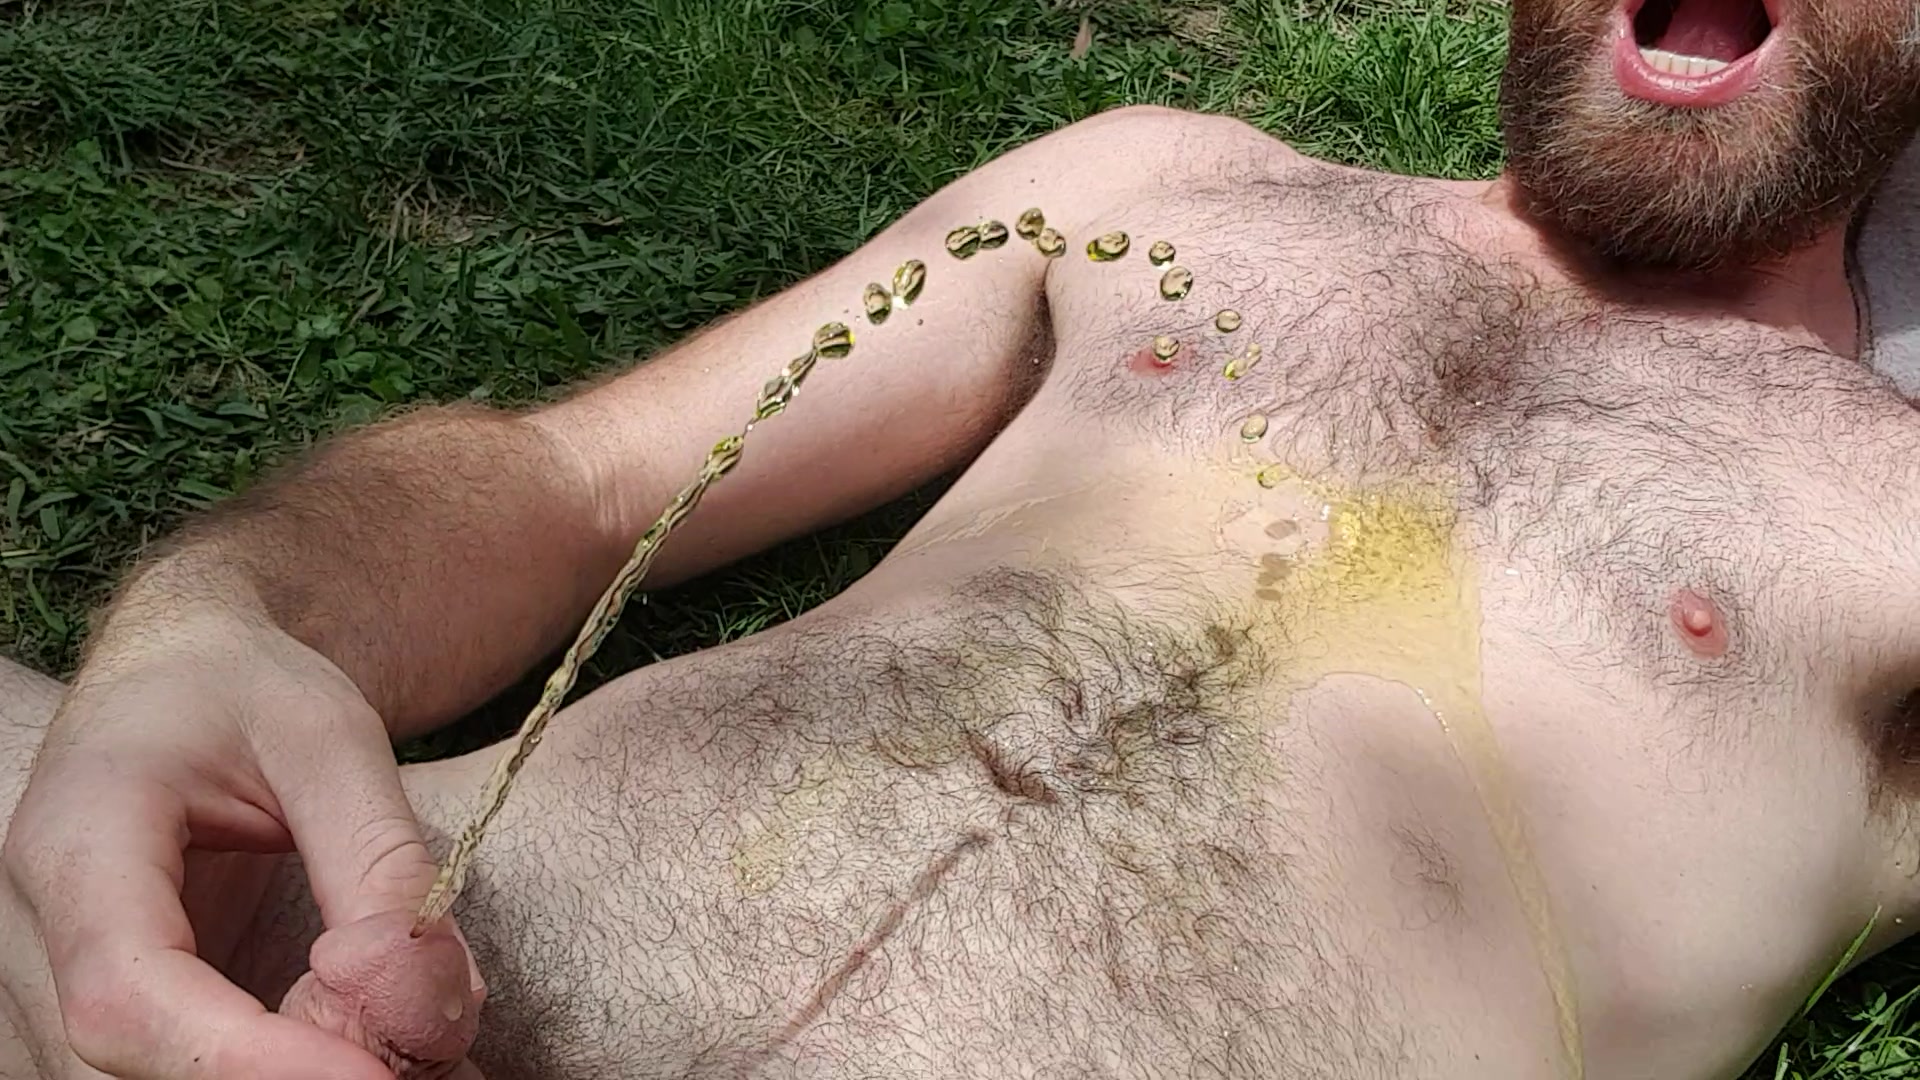 Pissing on myself in the backyard